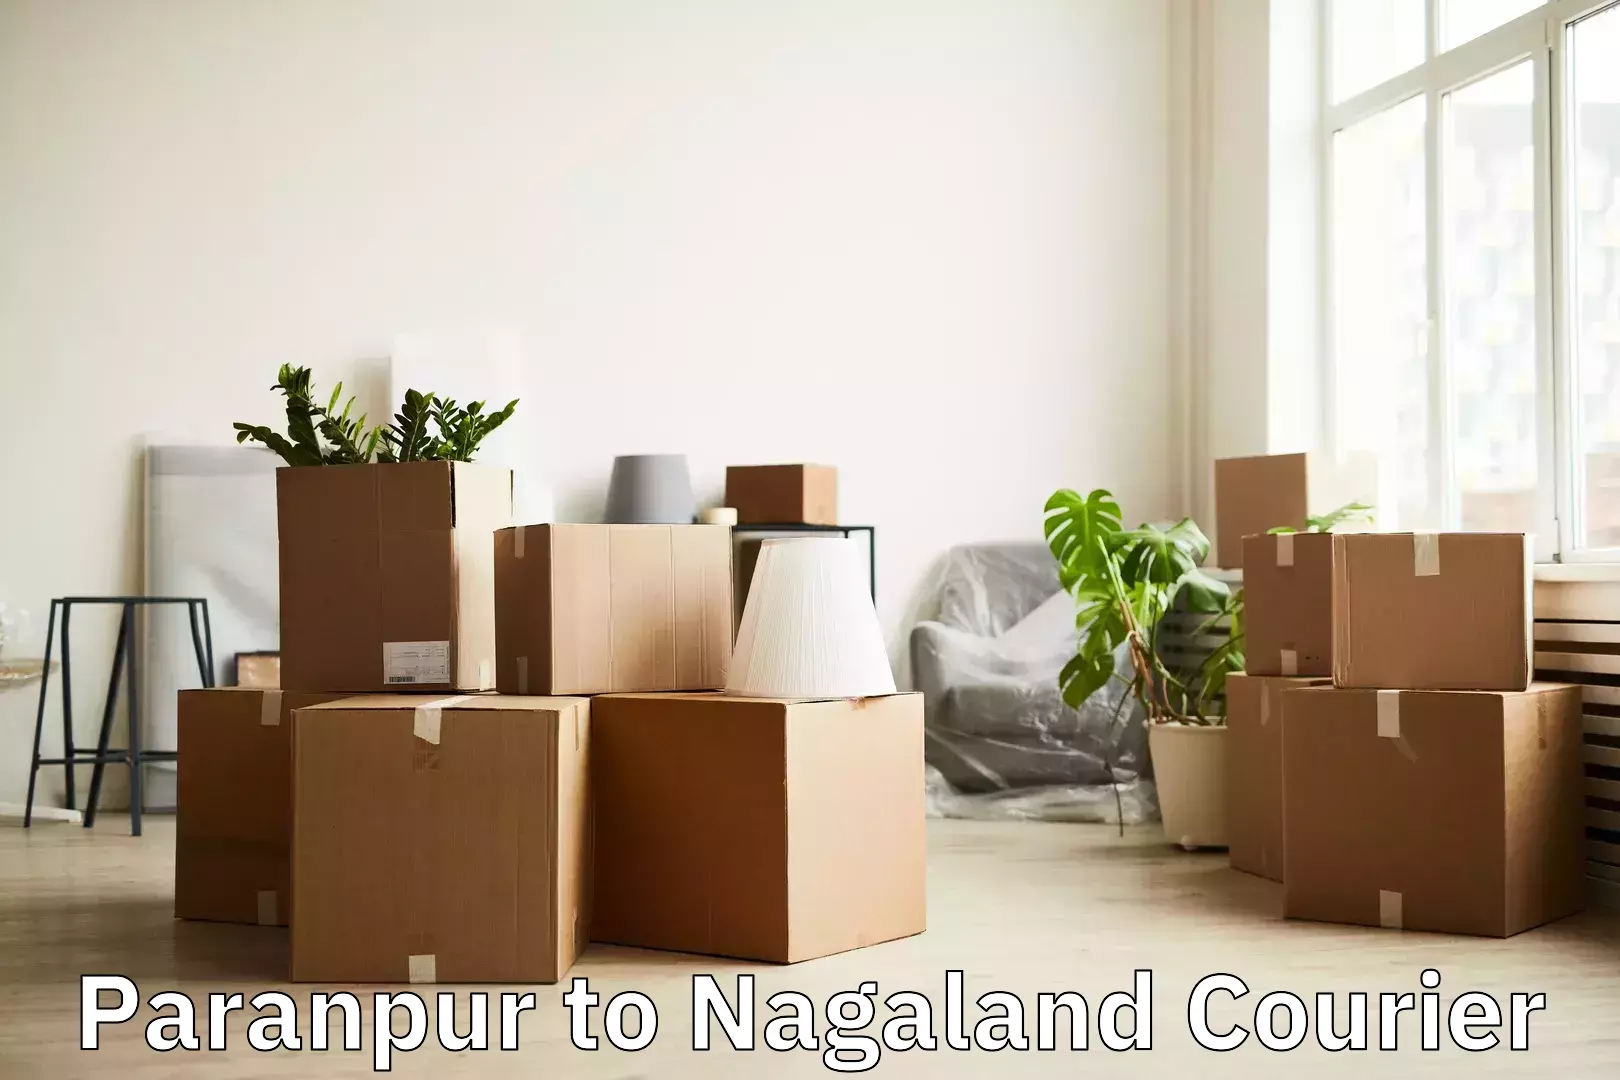 Luggage delivery calculator Paranpur to Nagaland